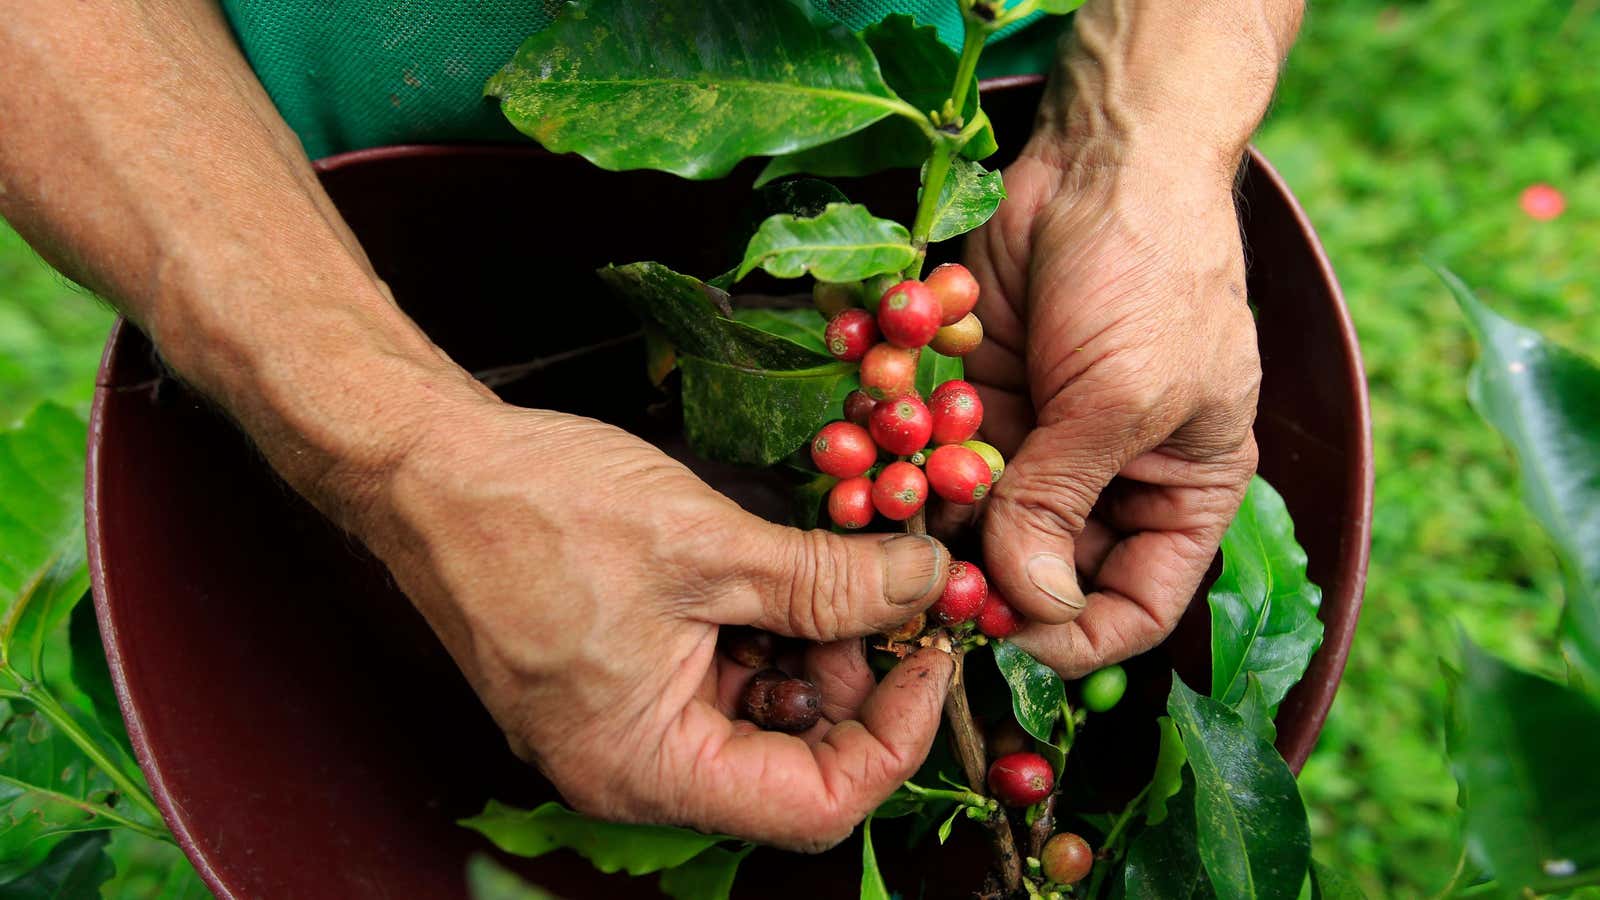 Its unique geography makes Colombia one of the world’s greatest coffee-producing nations.